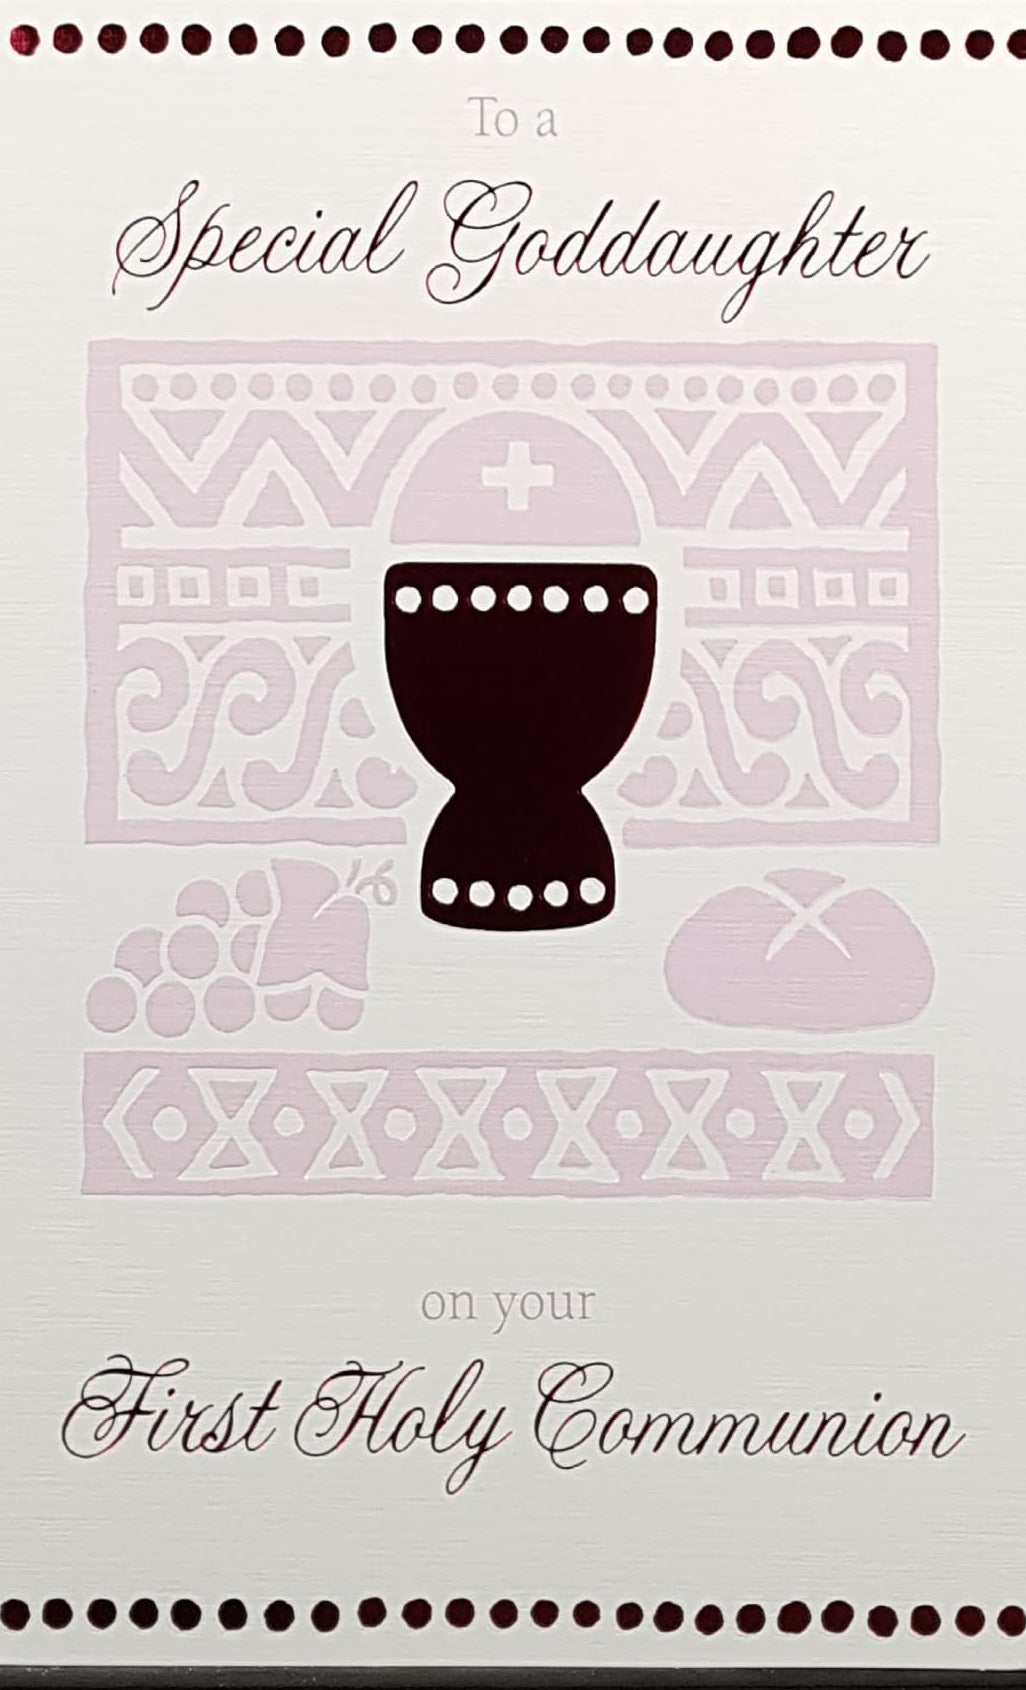 Communion Card - Goddaughter / A Pink Patterned Square